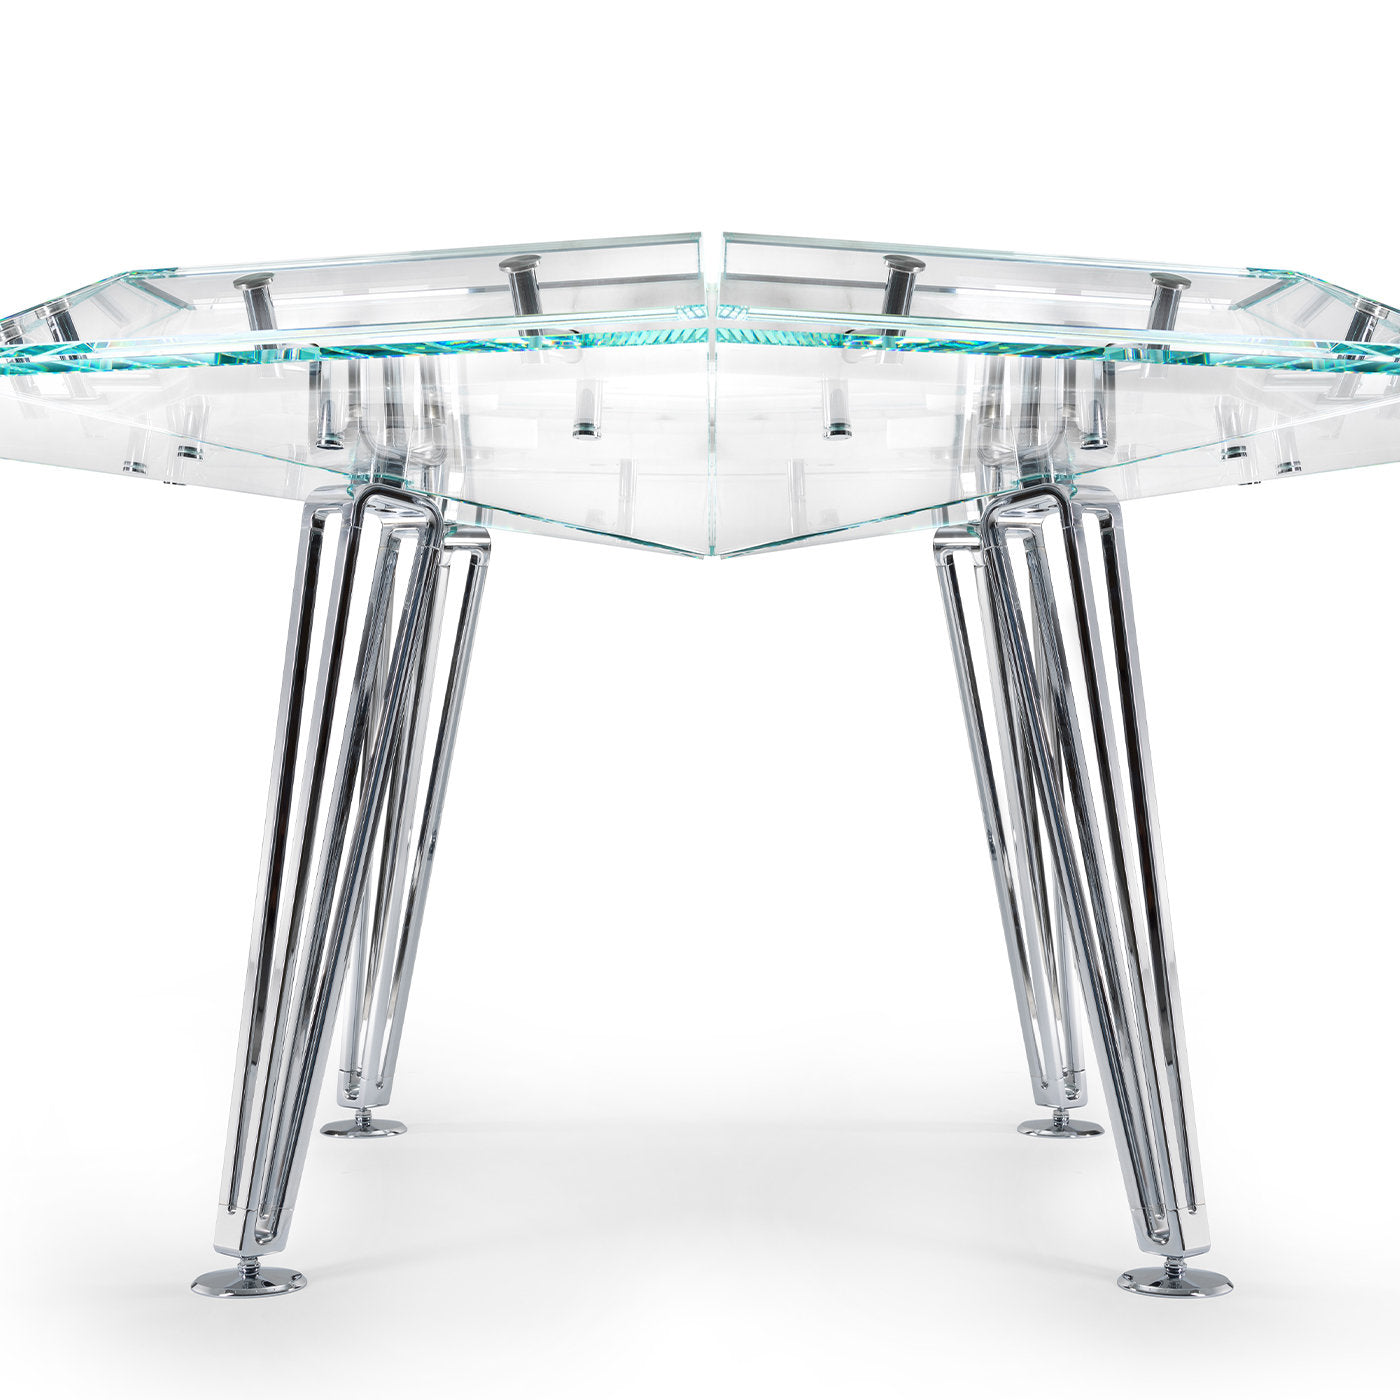 Unootto 8 Player Marble Edition White Poker Table - Alternative view 1